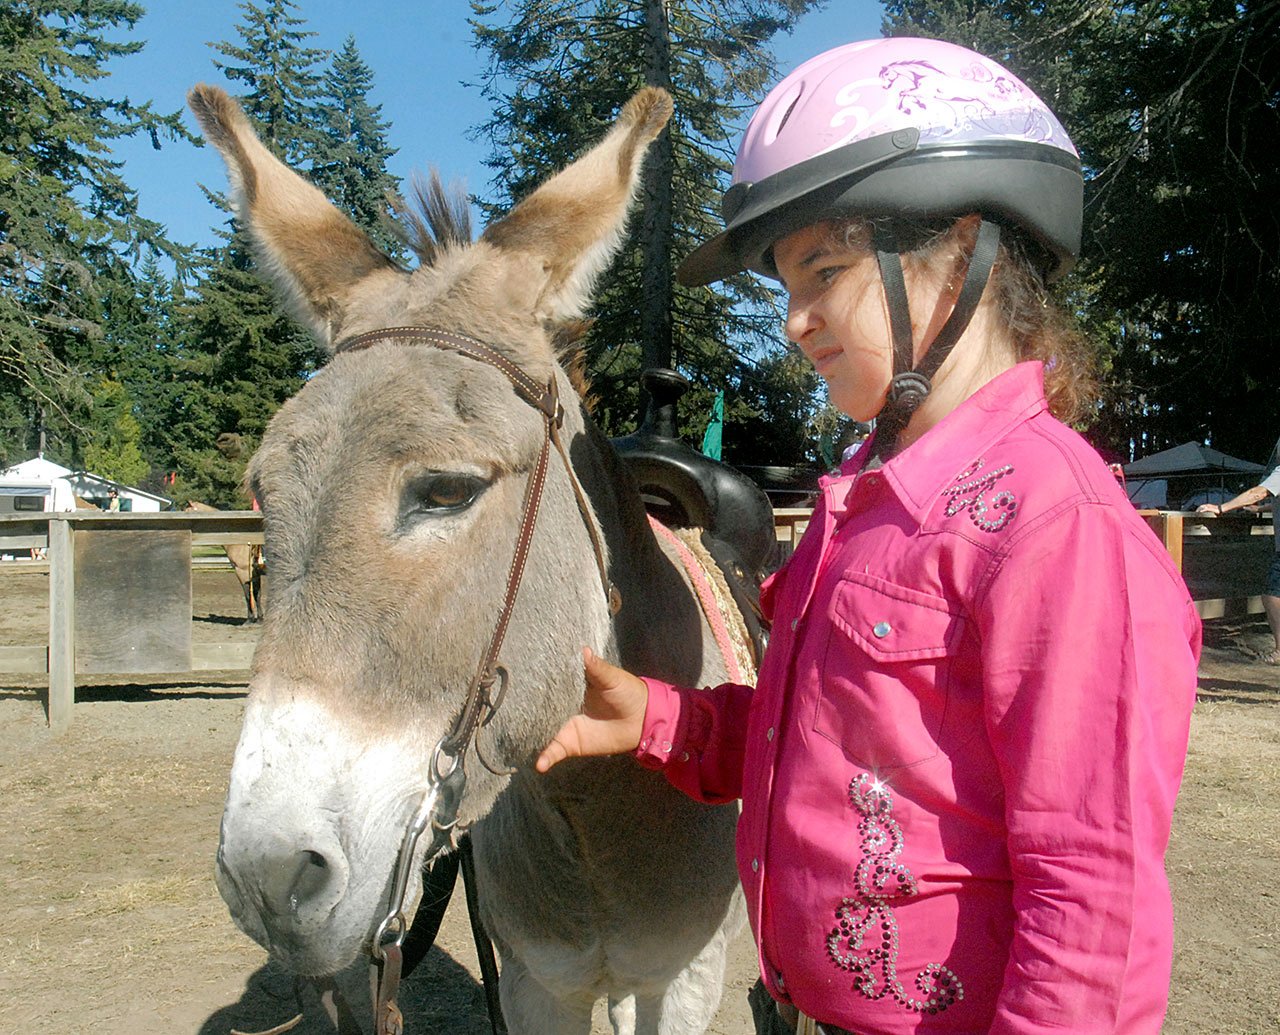 Ten-year-old Ashlynn Northaven of Port Angeles, a member of the Giddy Up and Grow 4-H, waits for a turn in the ring with her donkey, Peppermint, on Saturday. (Keith Thorpe/Peninsula Daily News)